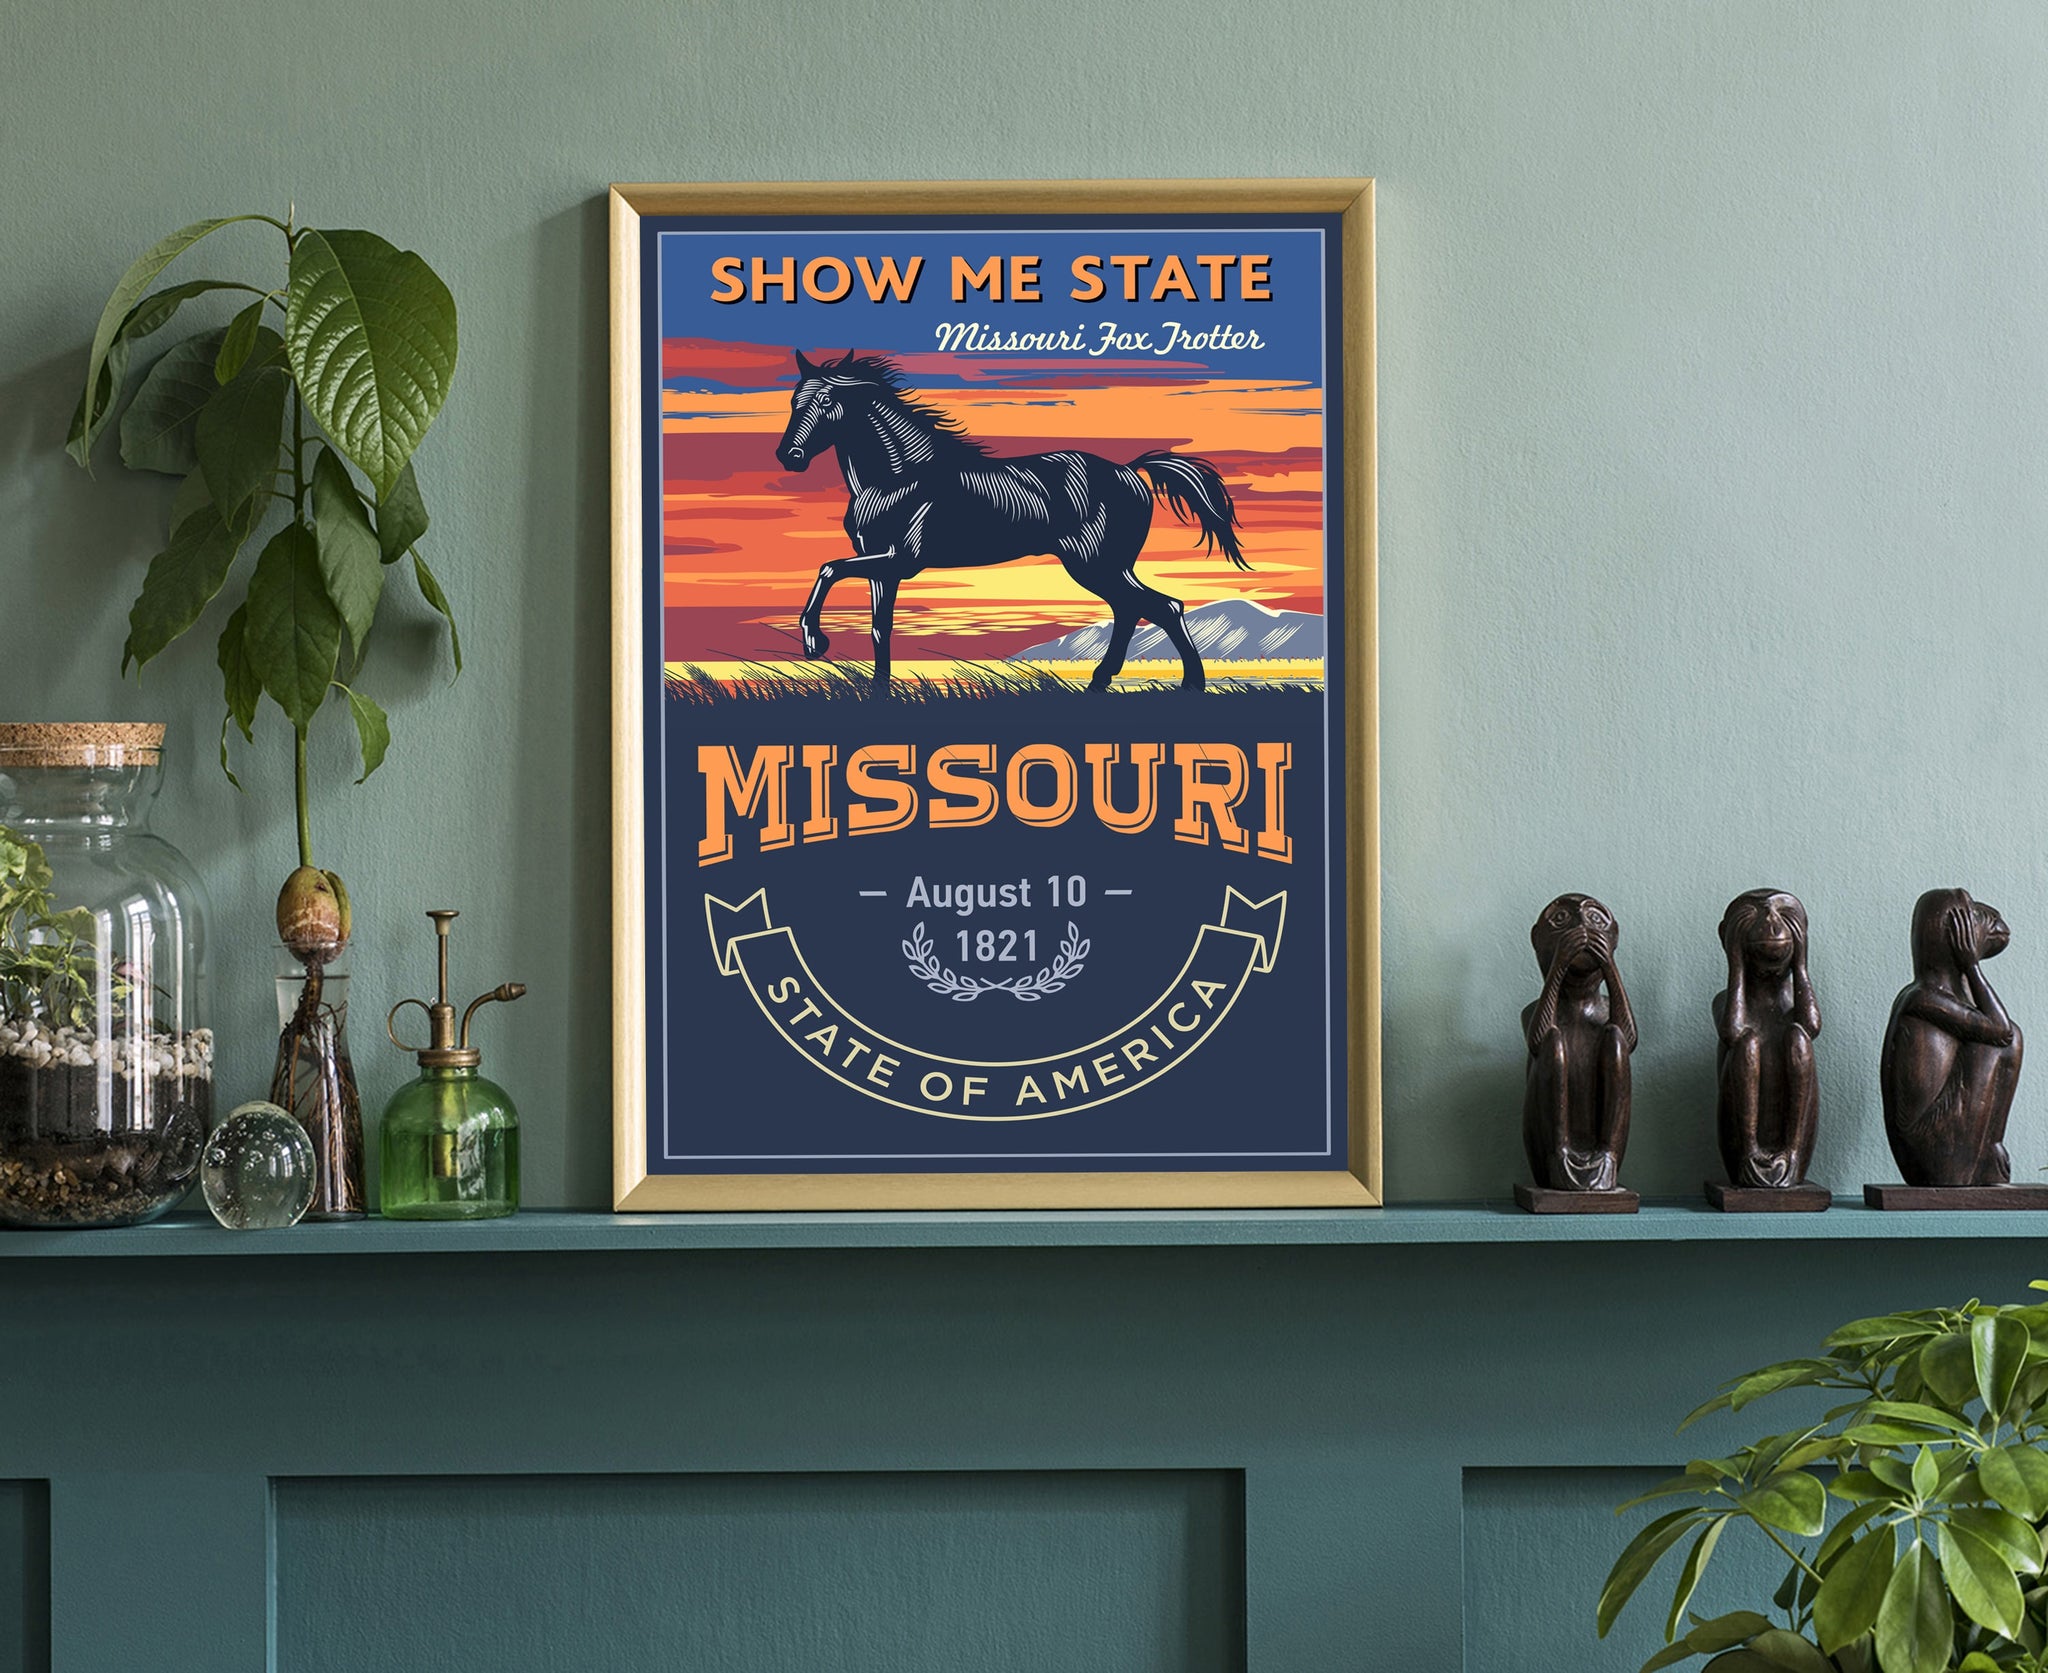 United States Poster, Missouri State Poster Print, Missouri State Emblem Poster, Retro Travel State Poster, Home and Office Wall Art